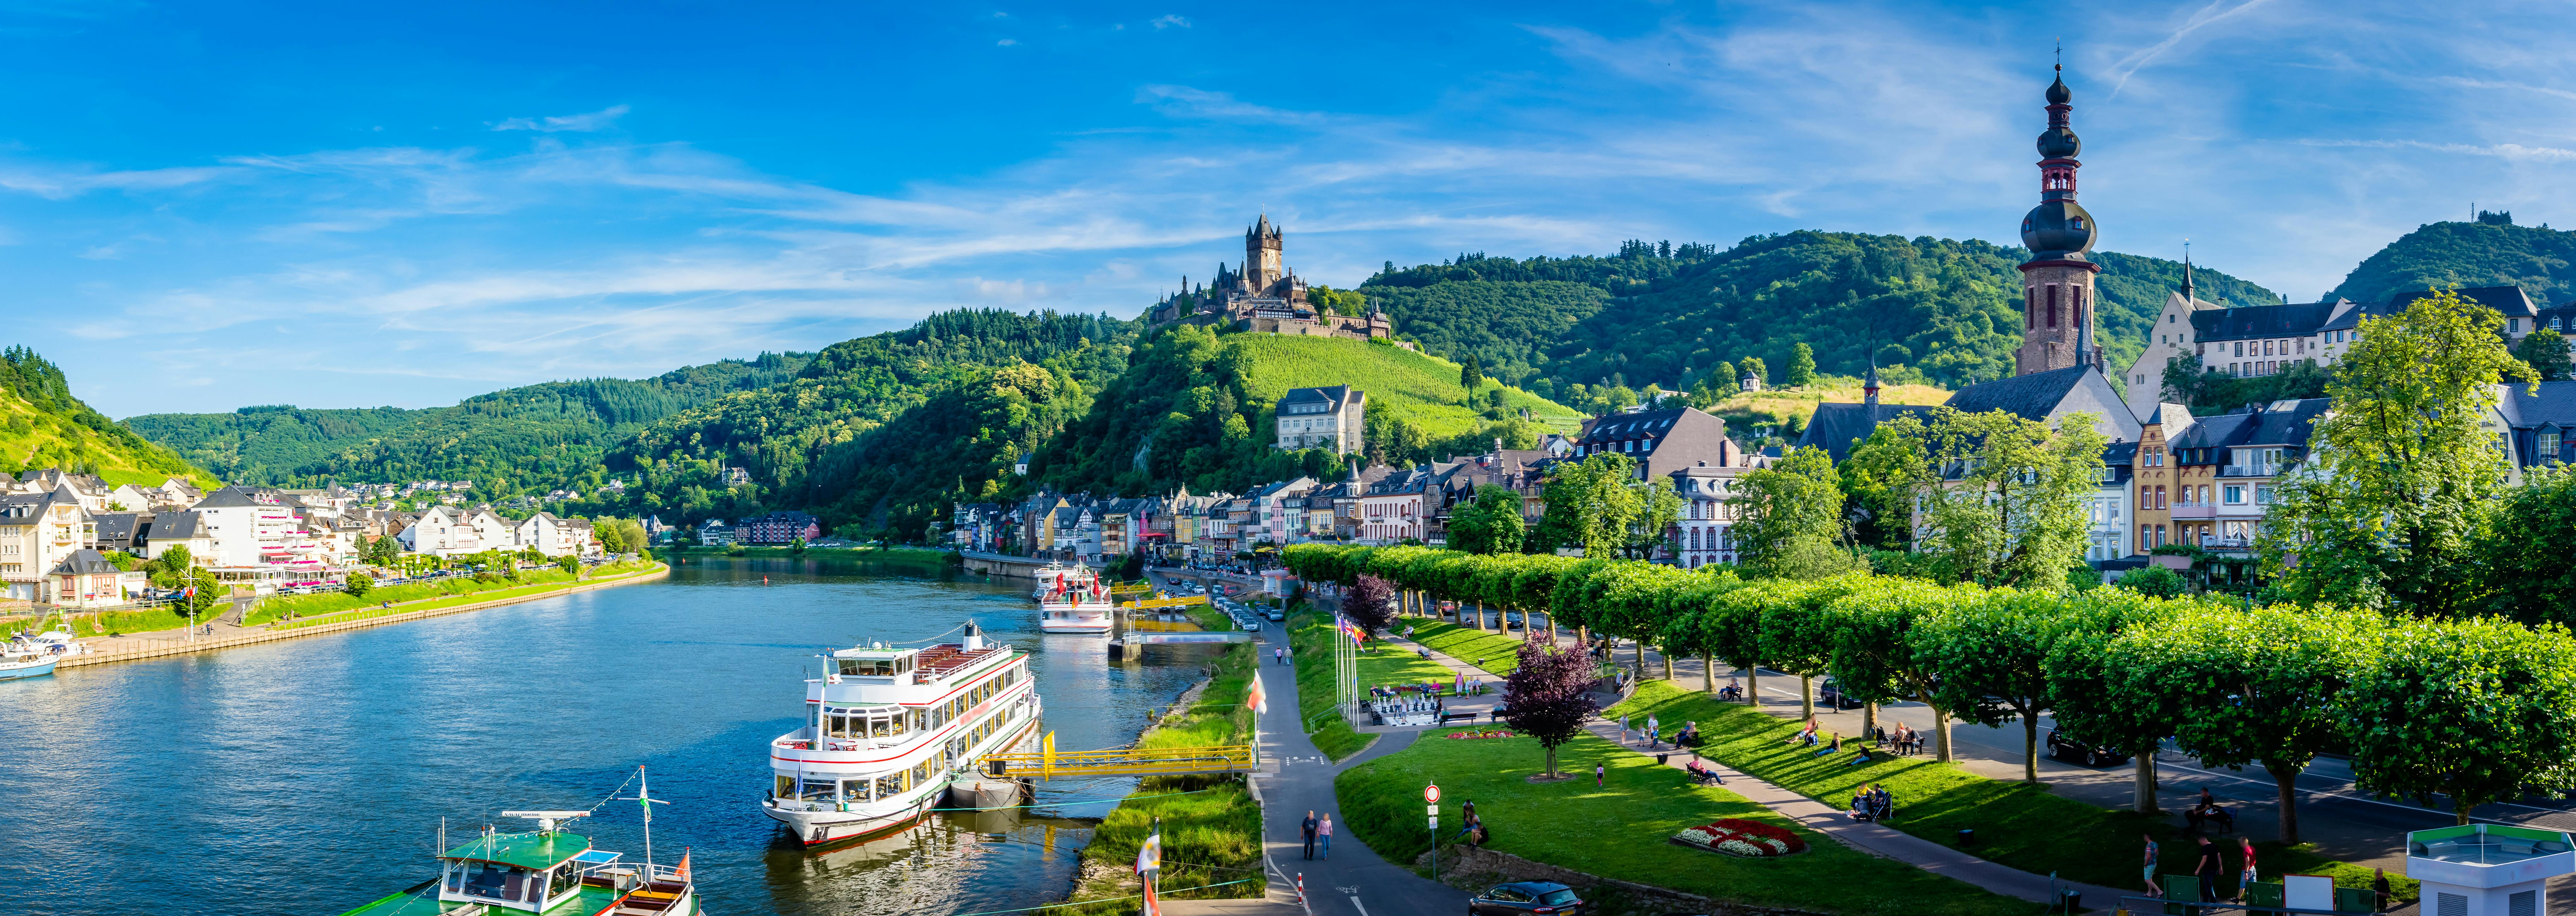 River Cruises Collection: Walking Tour Of Cochem